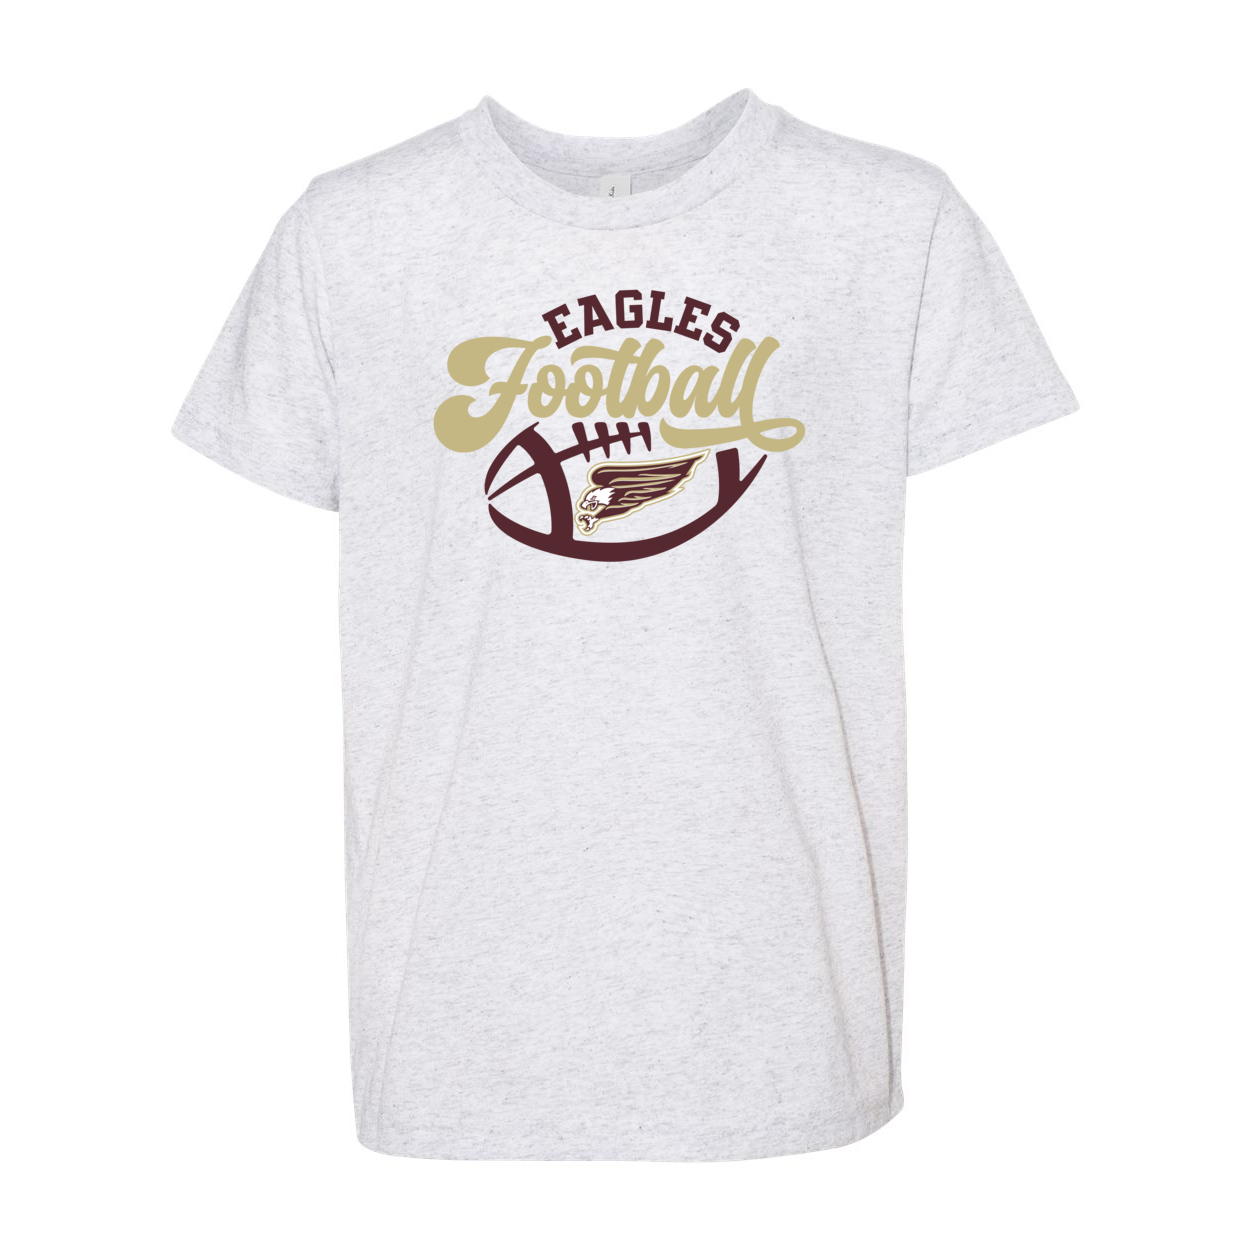 Youth Super Soft Eagles Football Short Sleeve Graphic Tee